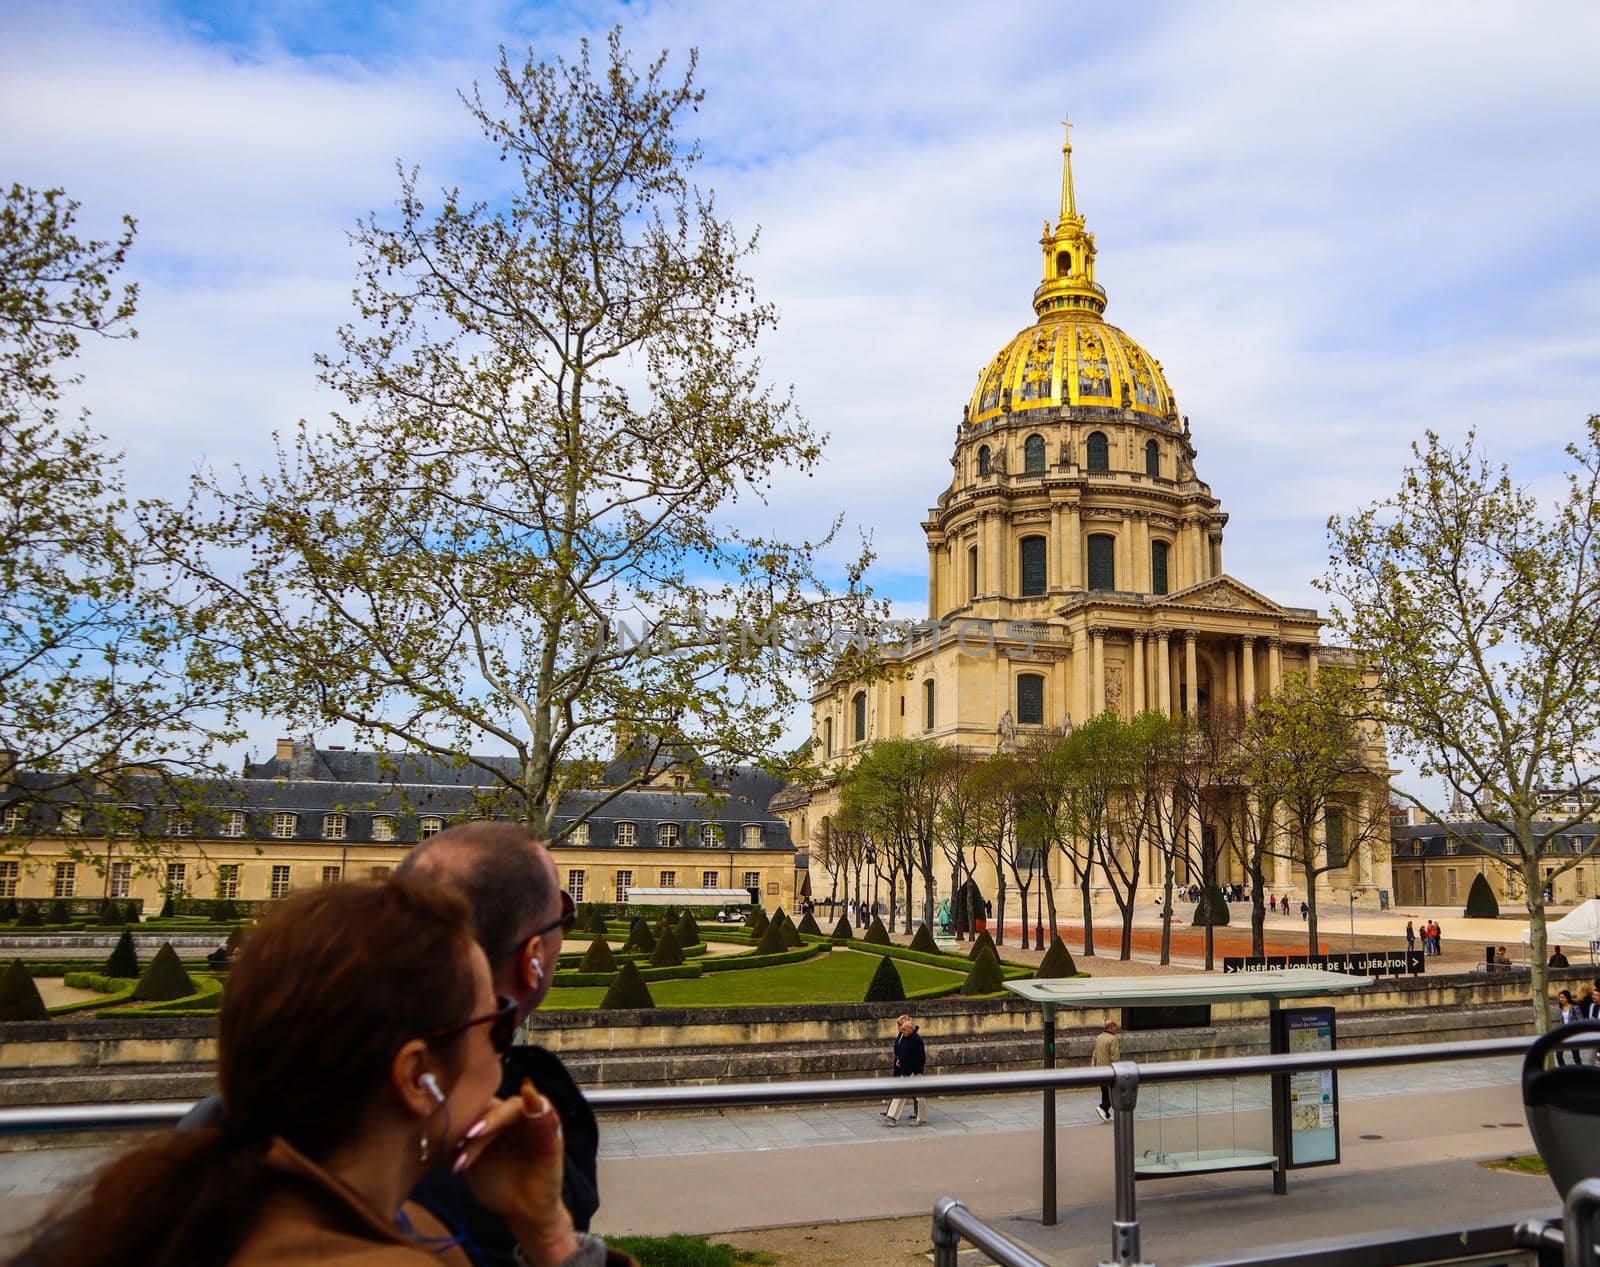 Domed Church of the Invalides and tourists on a tourist bus in Paris. France. April 2019